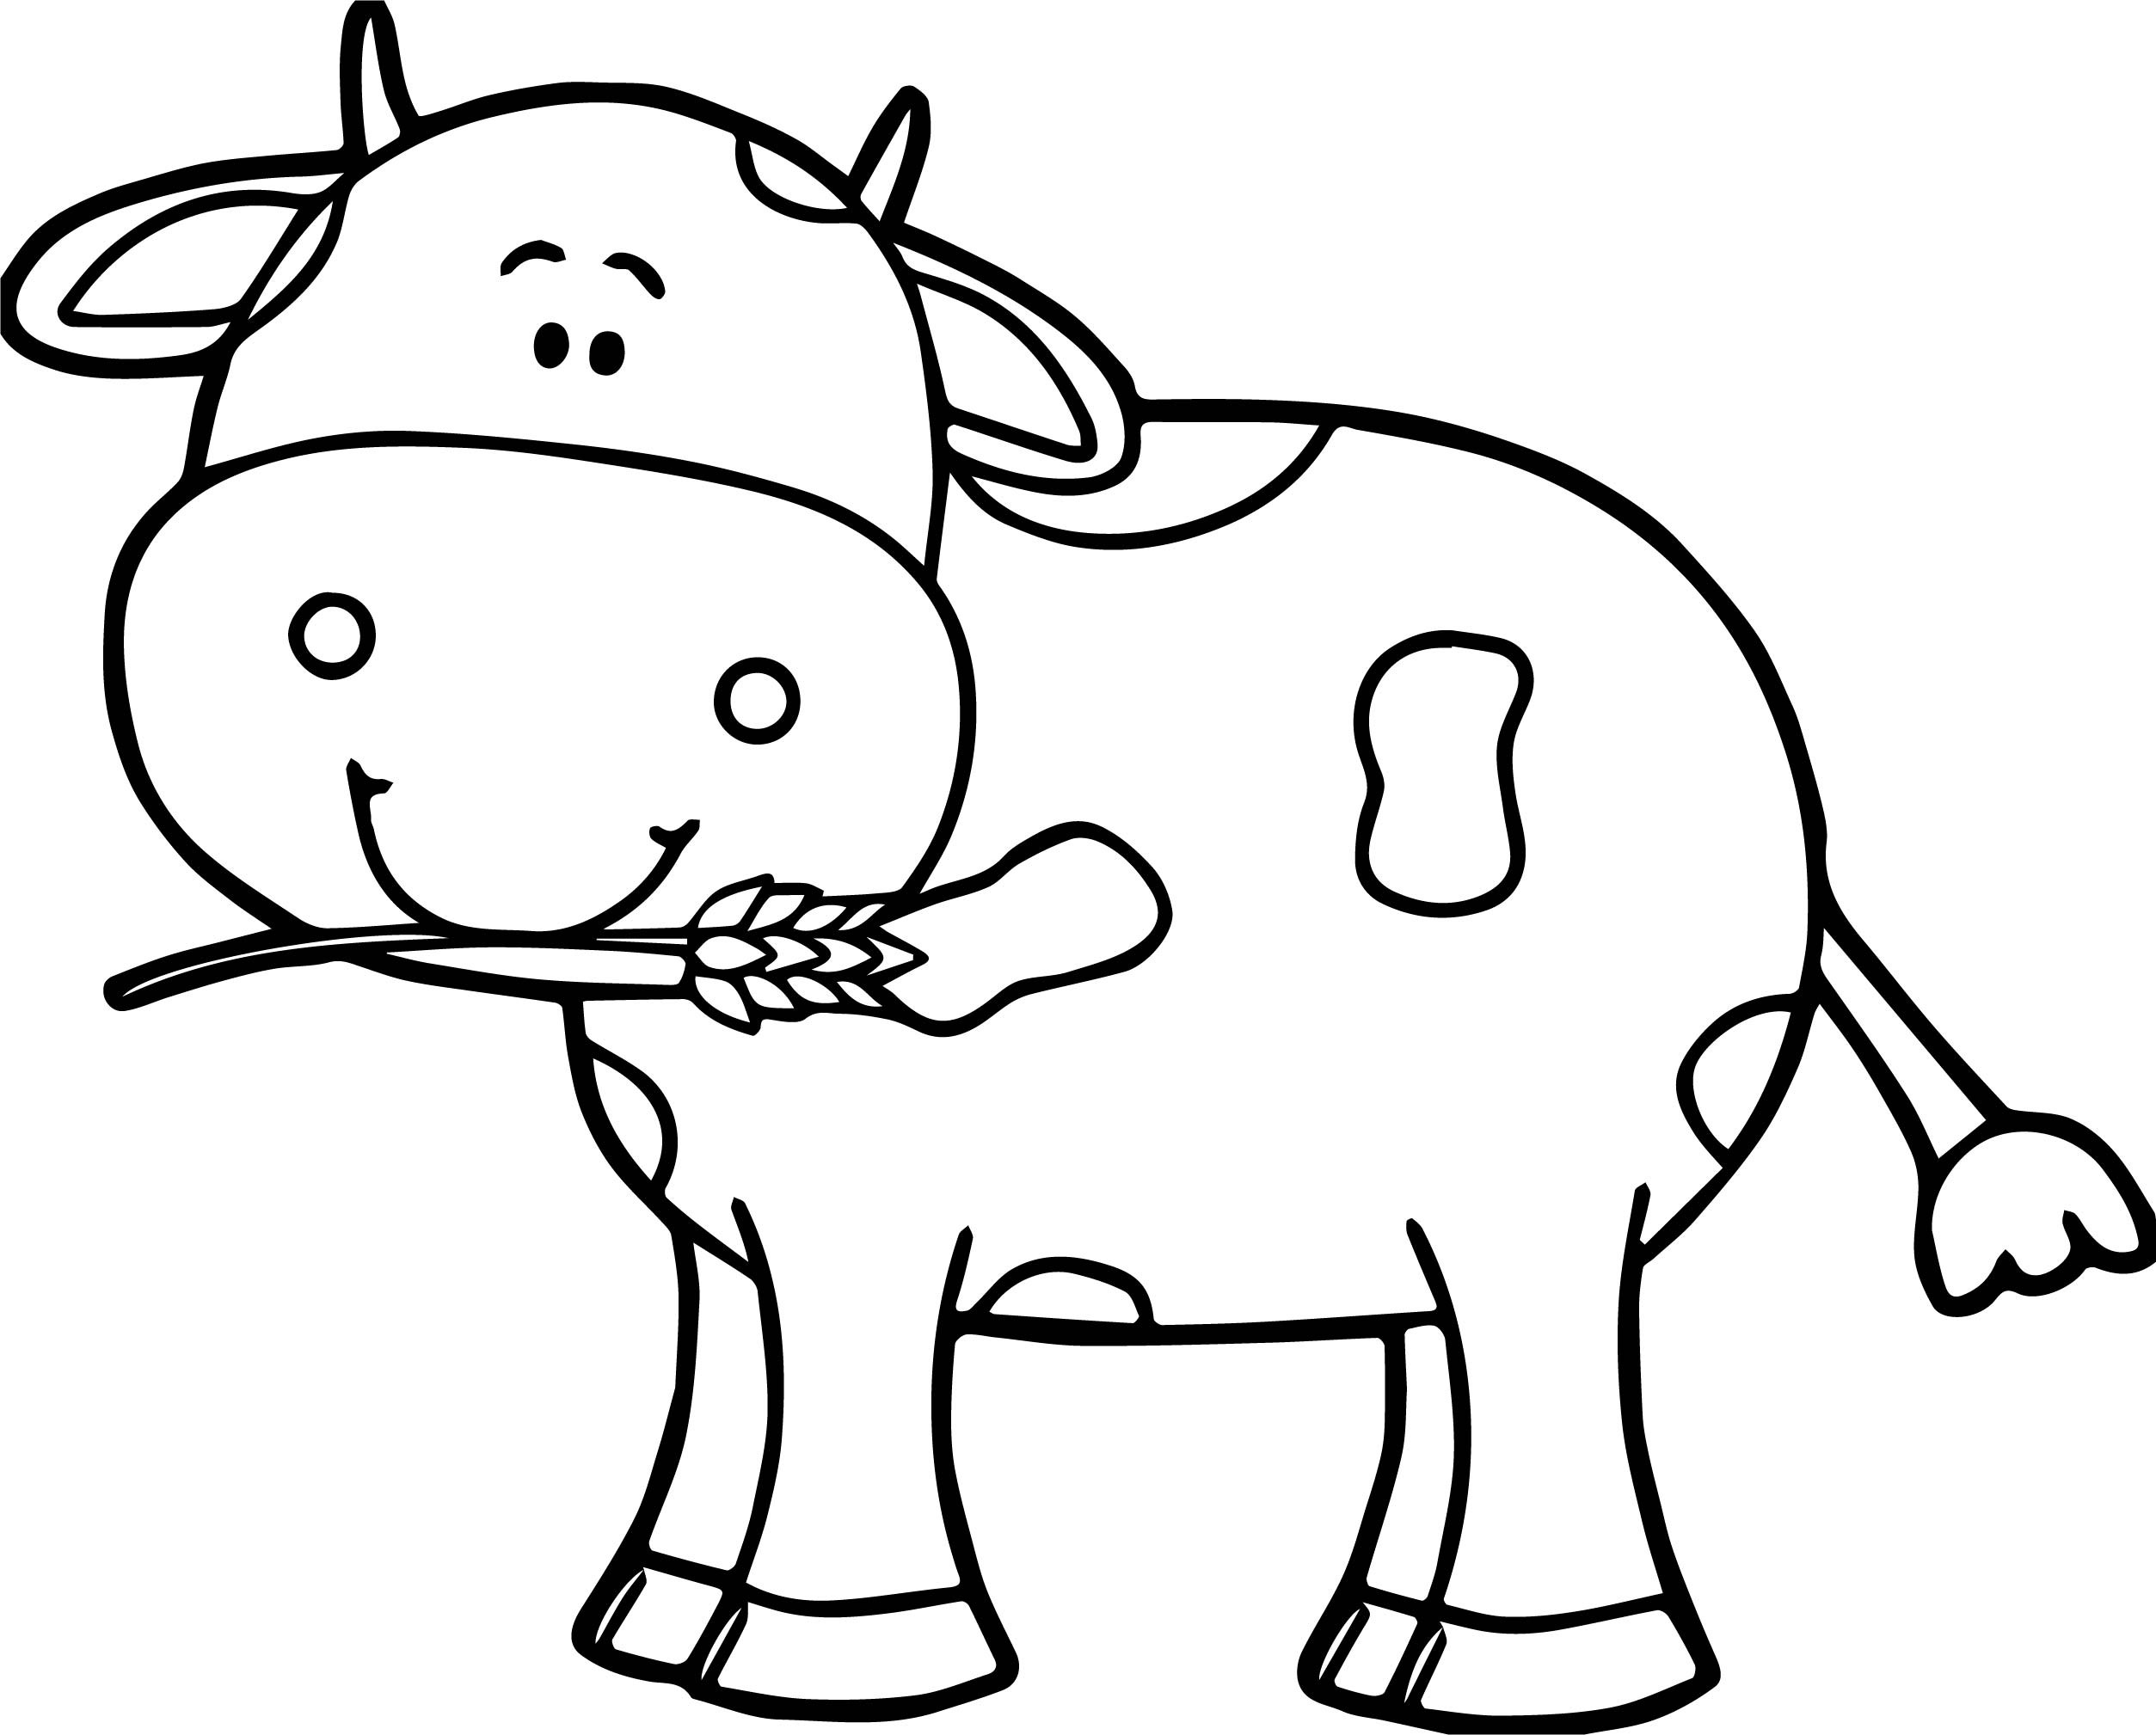 Realistic Cow Coloring Pages At GetDrawings Free Download